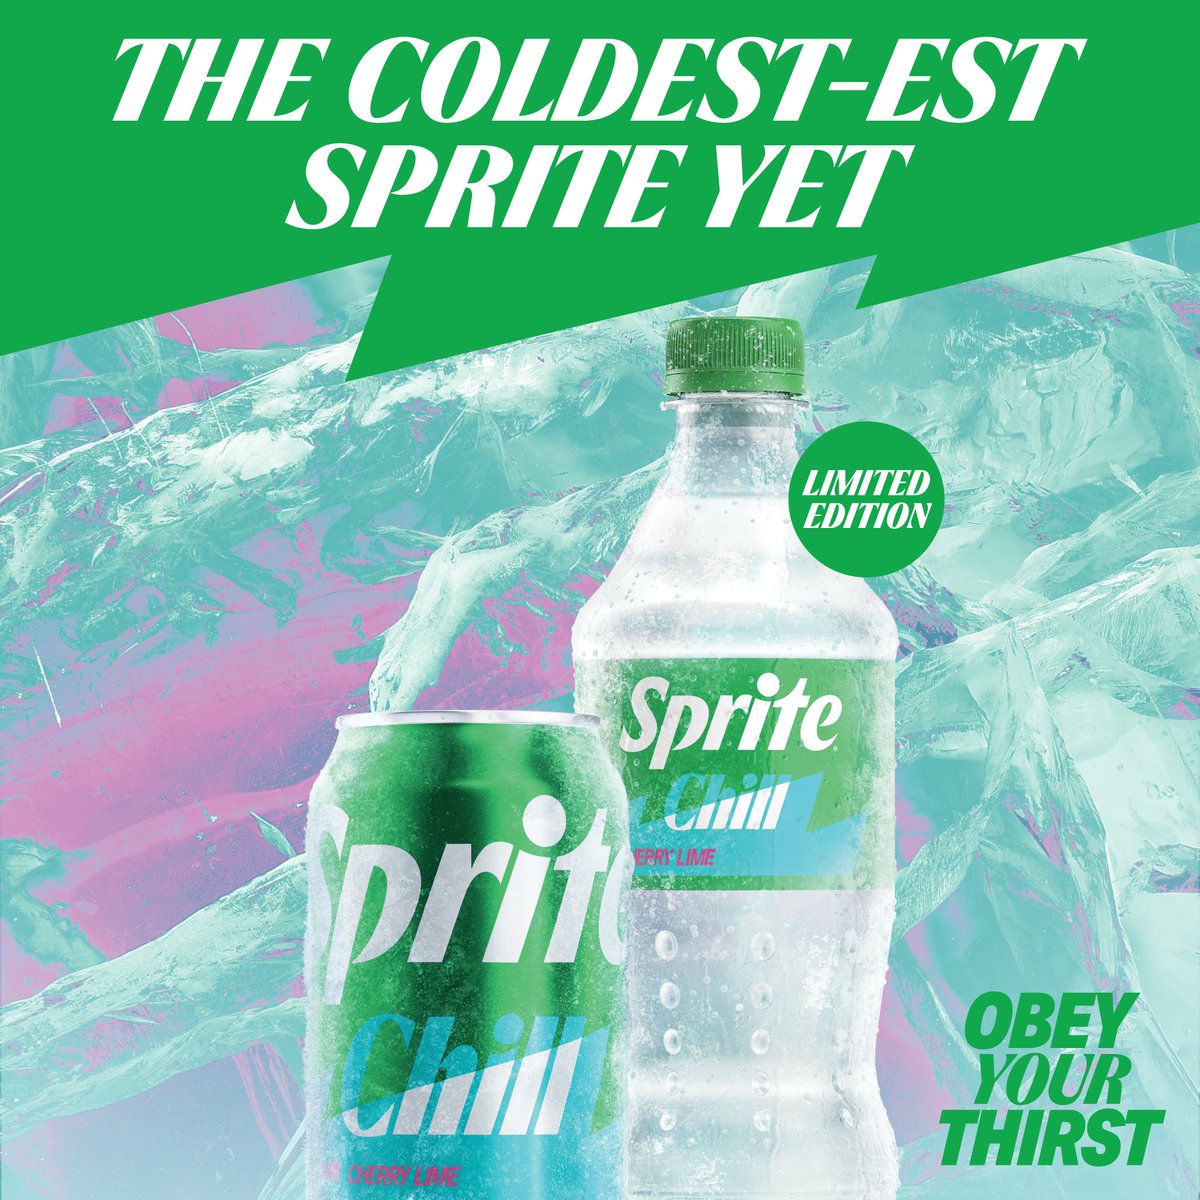 Introducing new, limited-edition Sprite Chill: the coldest-est lemon-lime flavored soda in the game, featuring a cherry lime taste and a unique cooling effect. Available in full sugar and zero sugar options.

#Sprite #SpriteChill #ObeyYourThirst